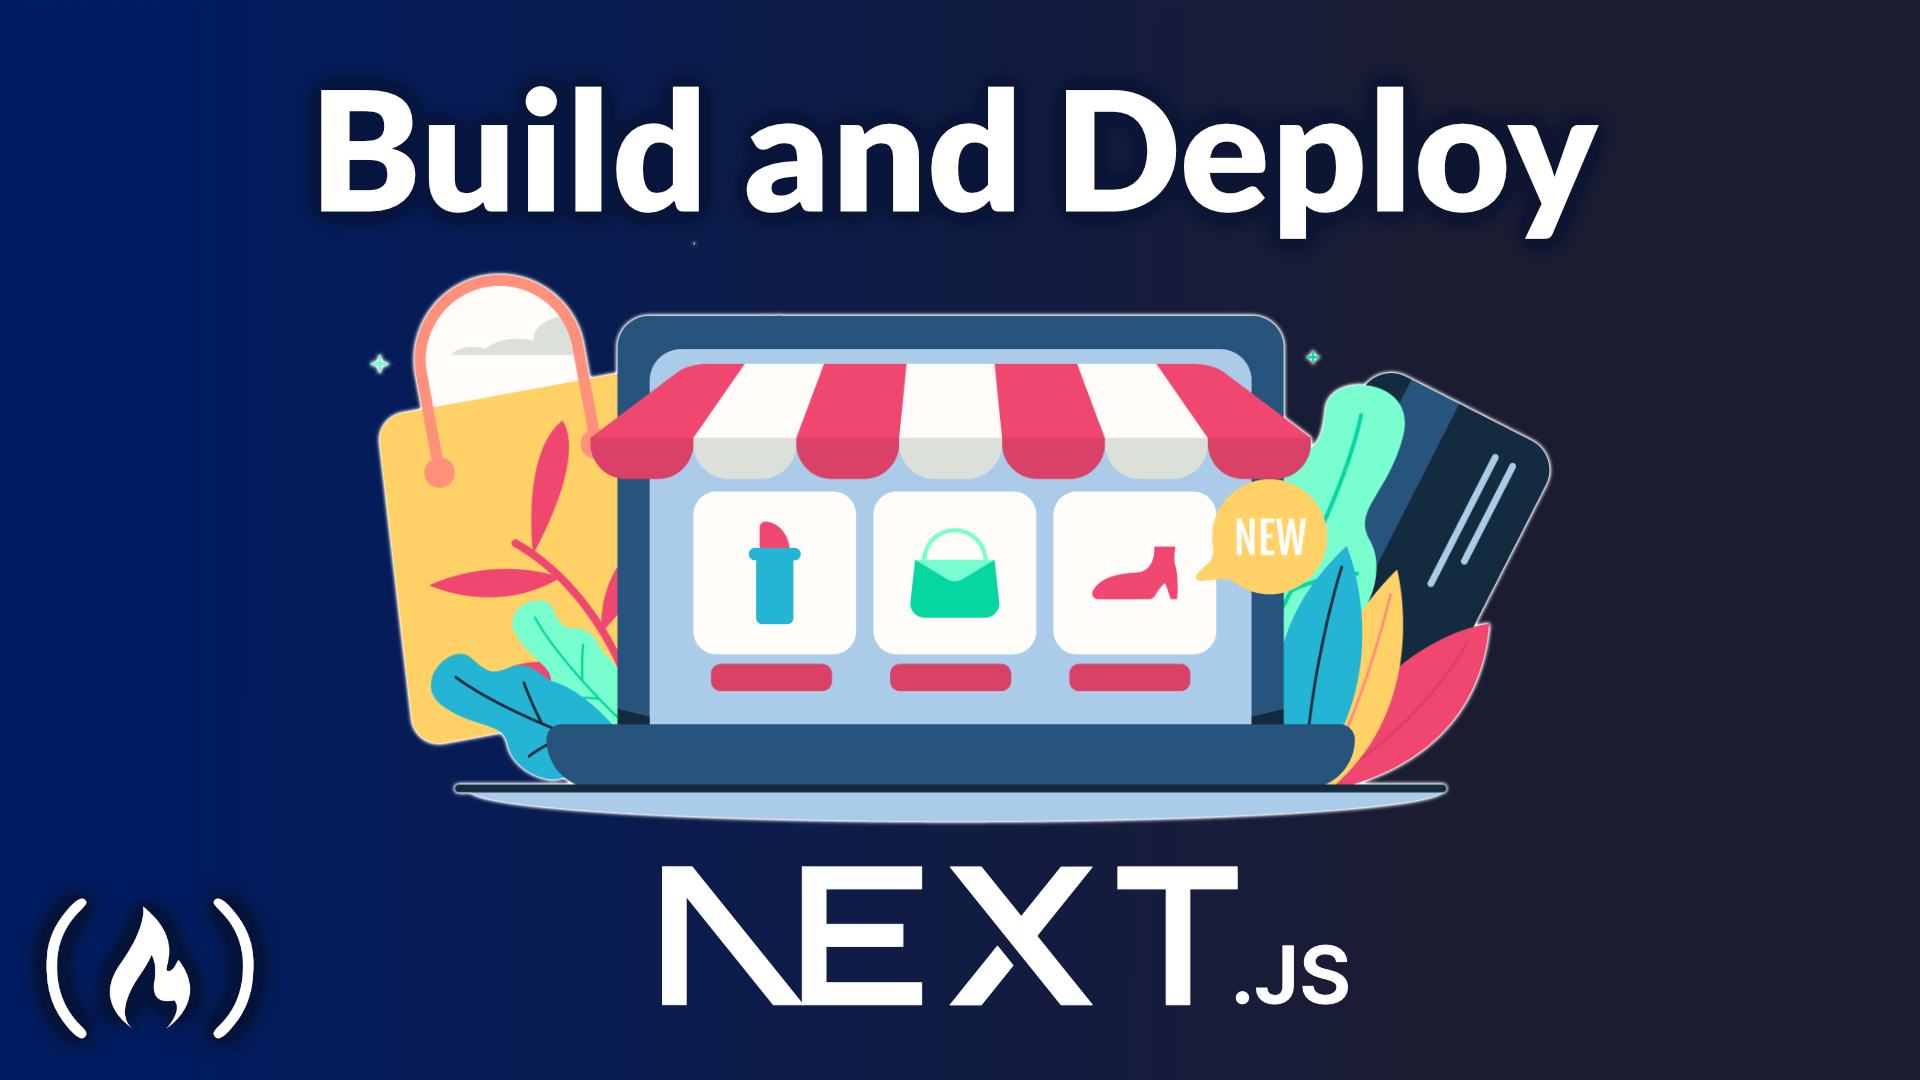 Build and Deploy an Ecommerce Site with Next.js, Tailwind CSS, Prisma, Vercel, and daisyUI